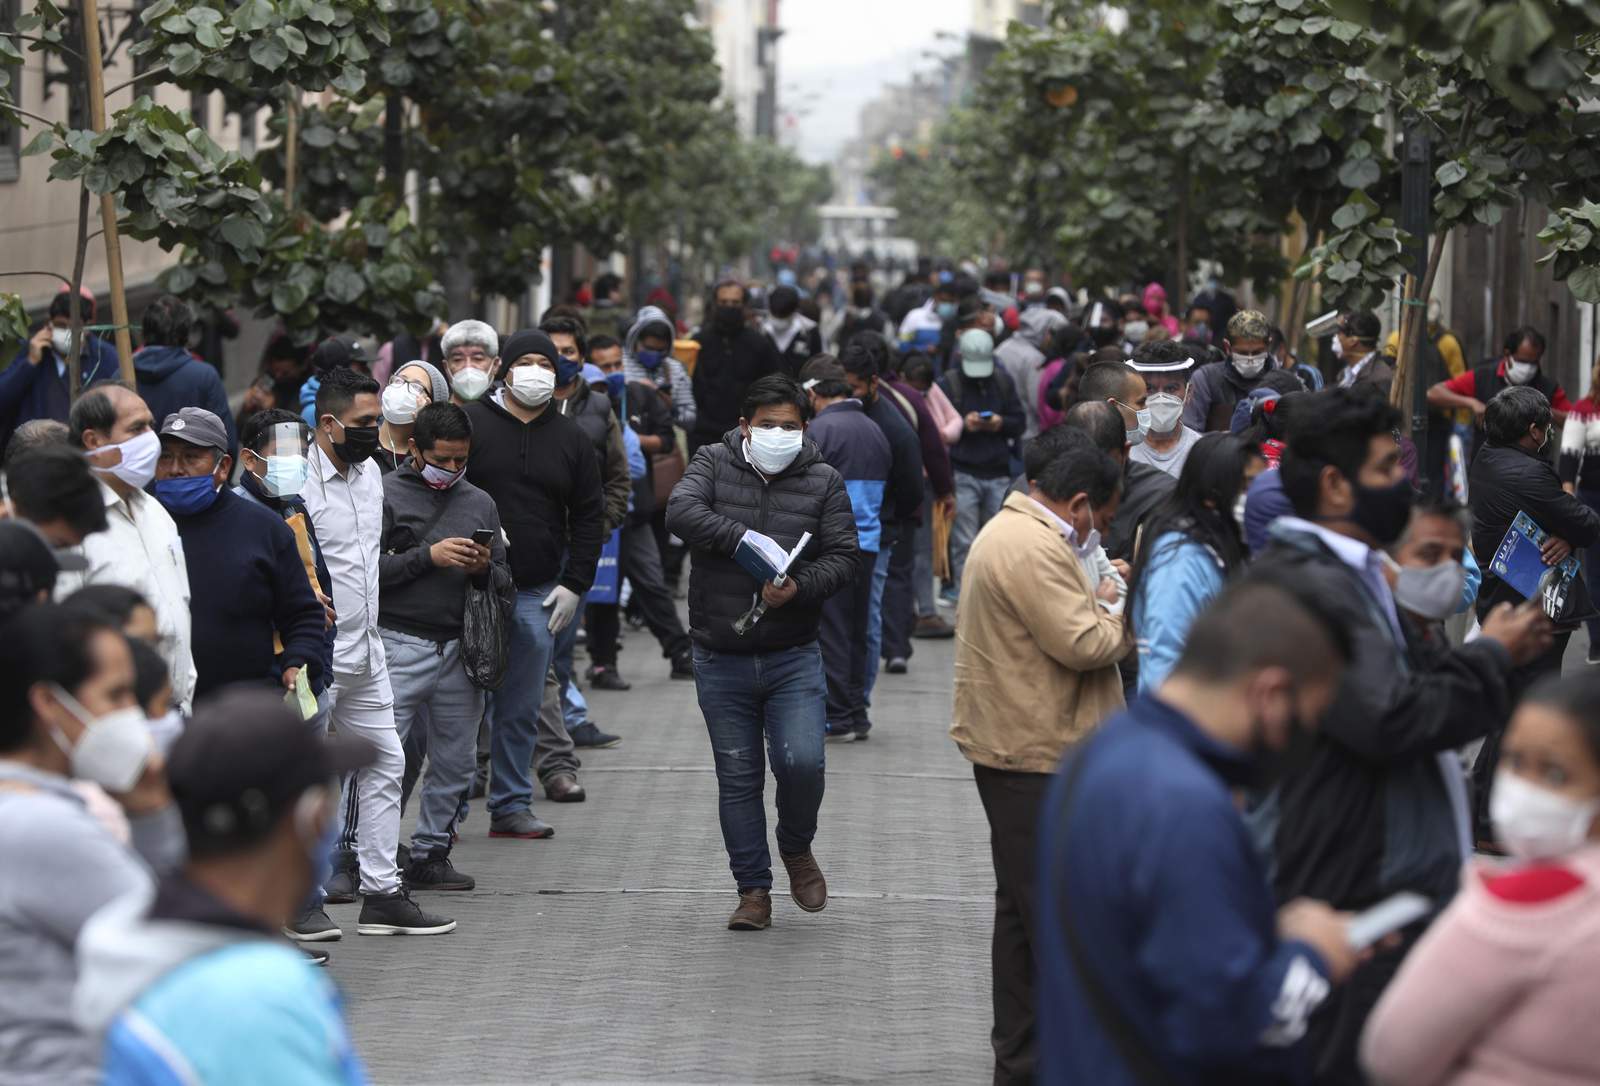 Peruvians fill streets as lockdown ends despite infections